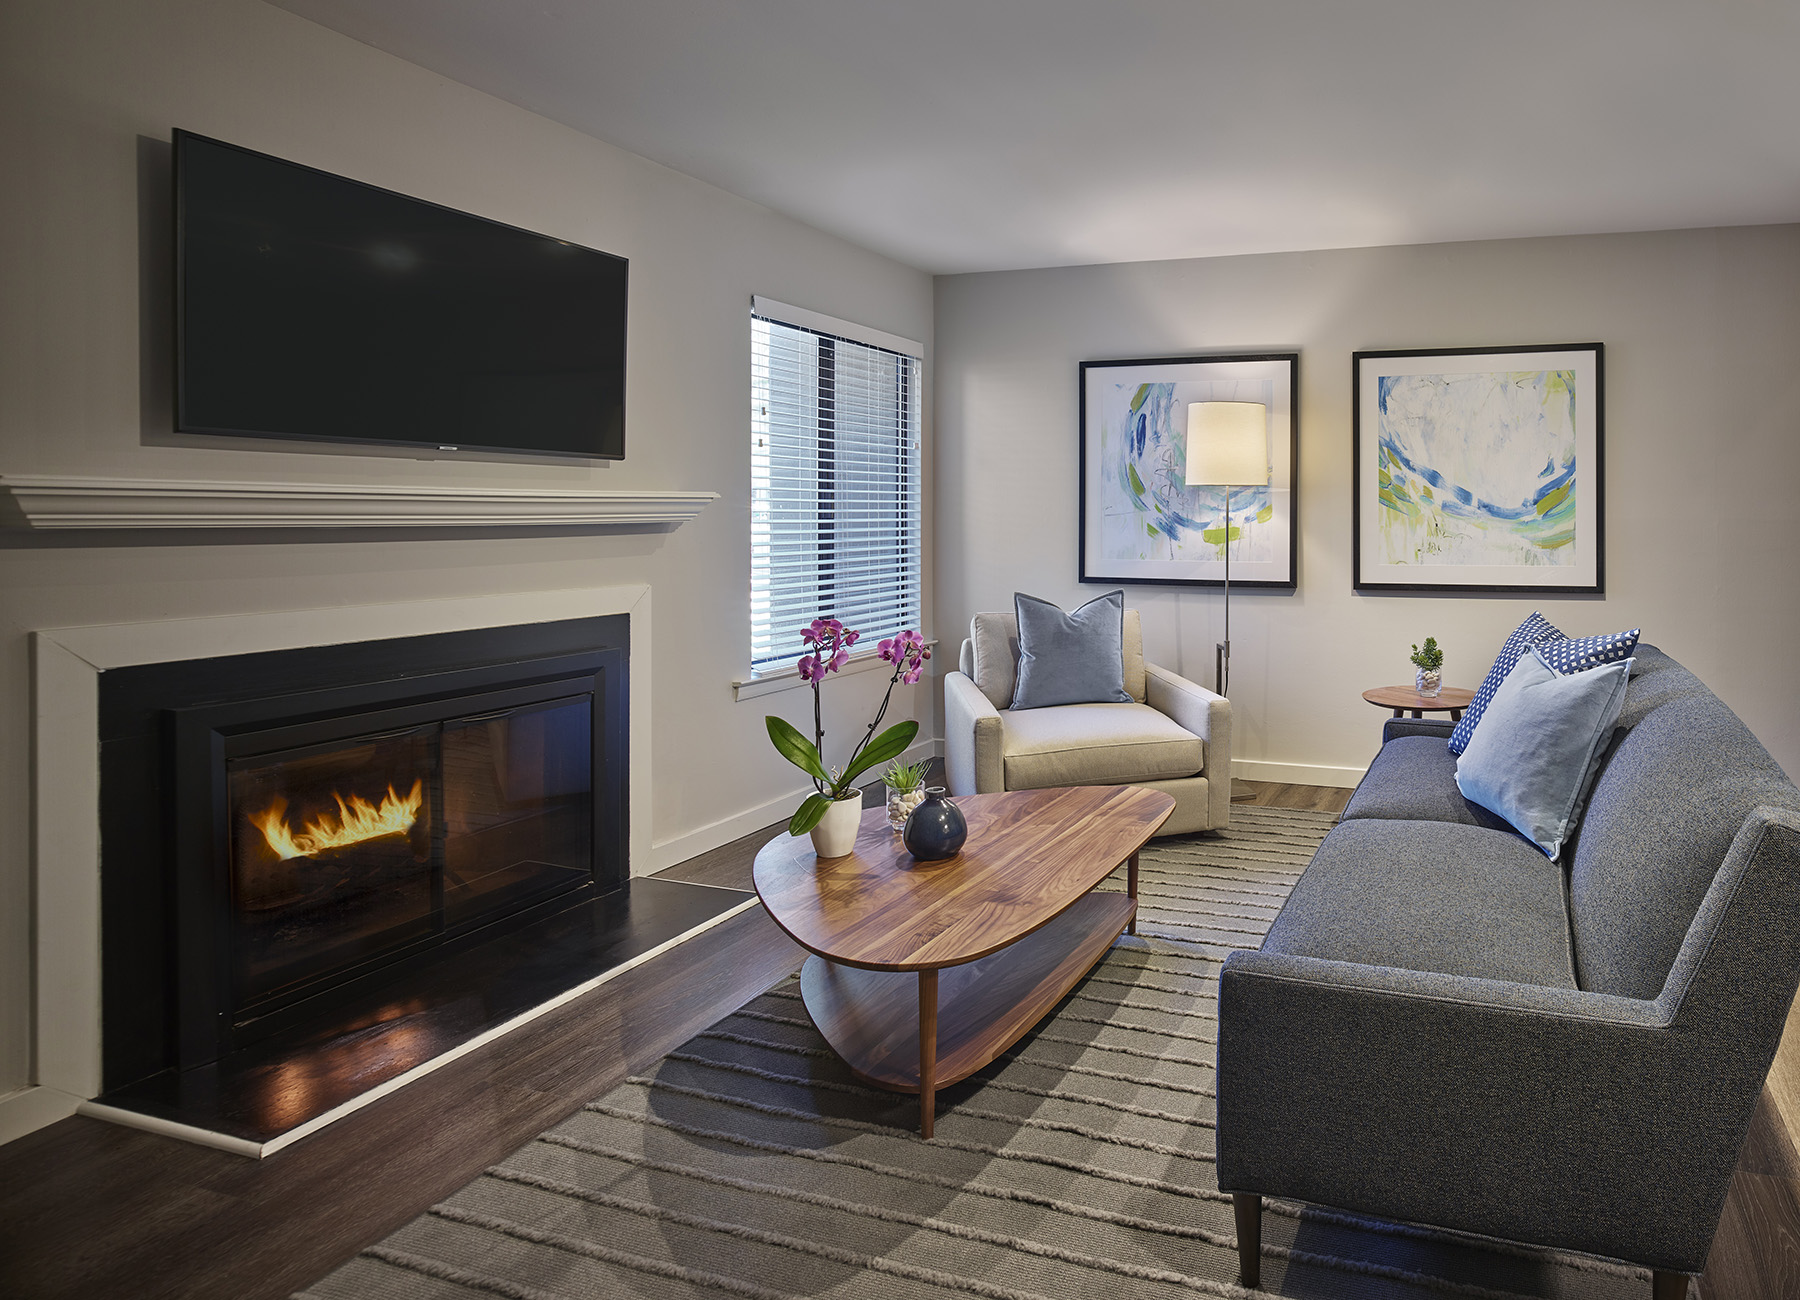 AVE Blue Bell Villas apartment living room with blue cushions on gray couch and a wood burning fireplace